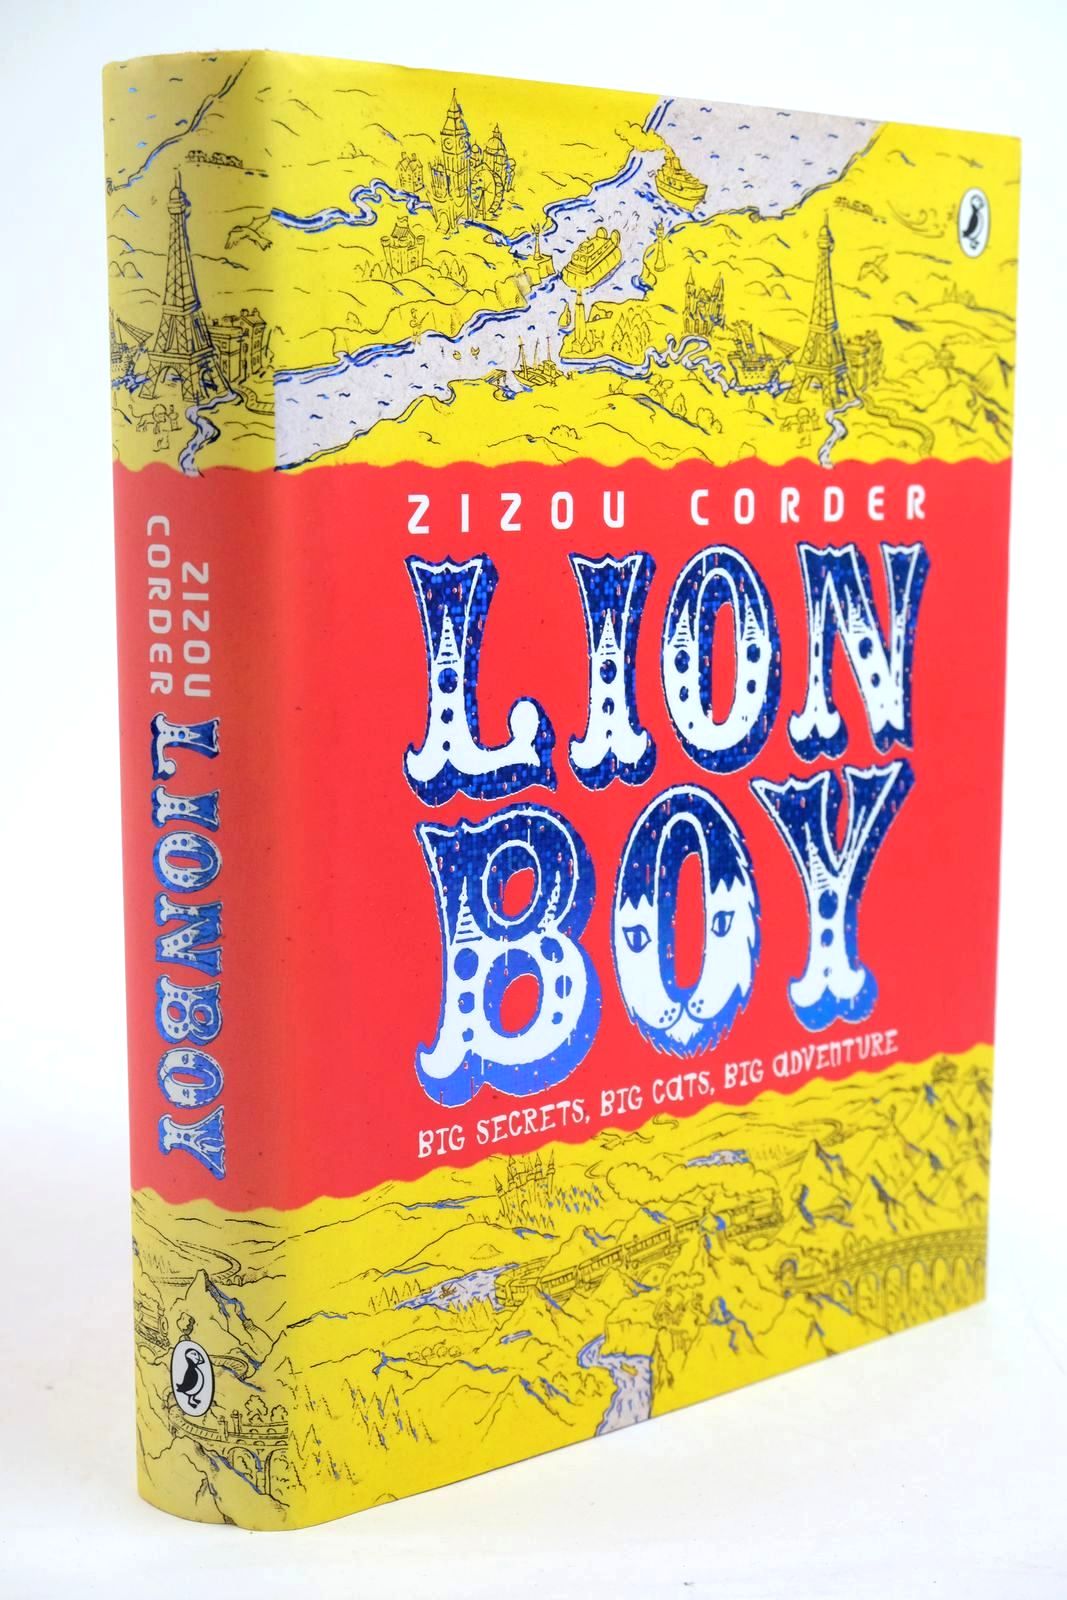 Photo of LIONBOY written by Corder, Zizou published by Puffin Books (STOCK CODE: 1321566)  for sale by Stella & Rose's Books